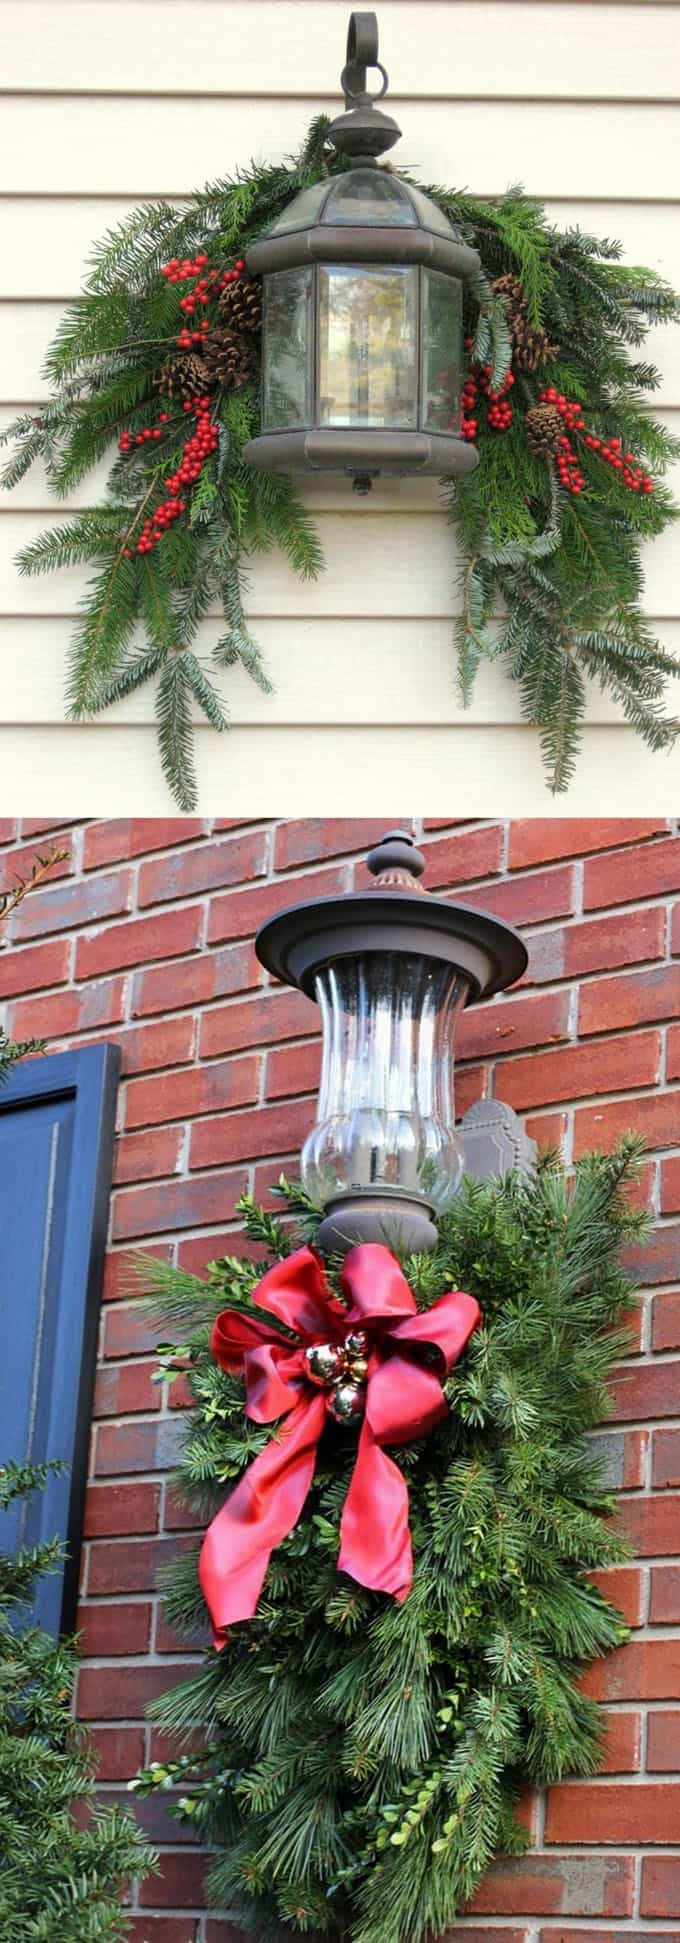 DIY Outdoor Decorating
 Gorgeous Outdoor Christmas Decorations 32 Best Ideas